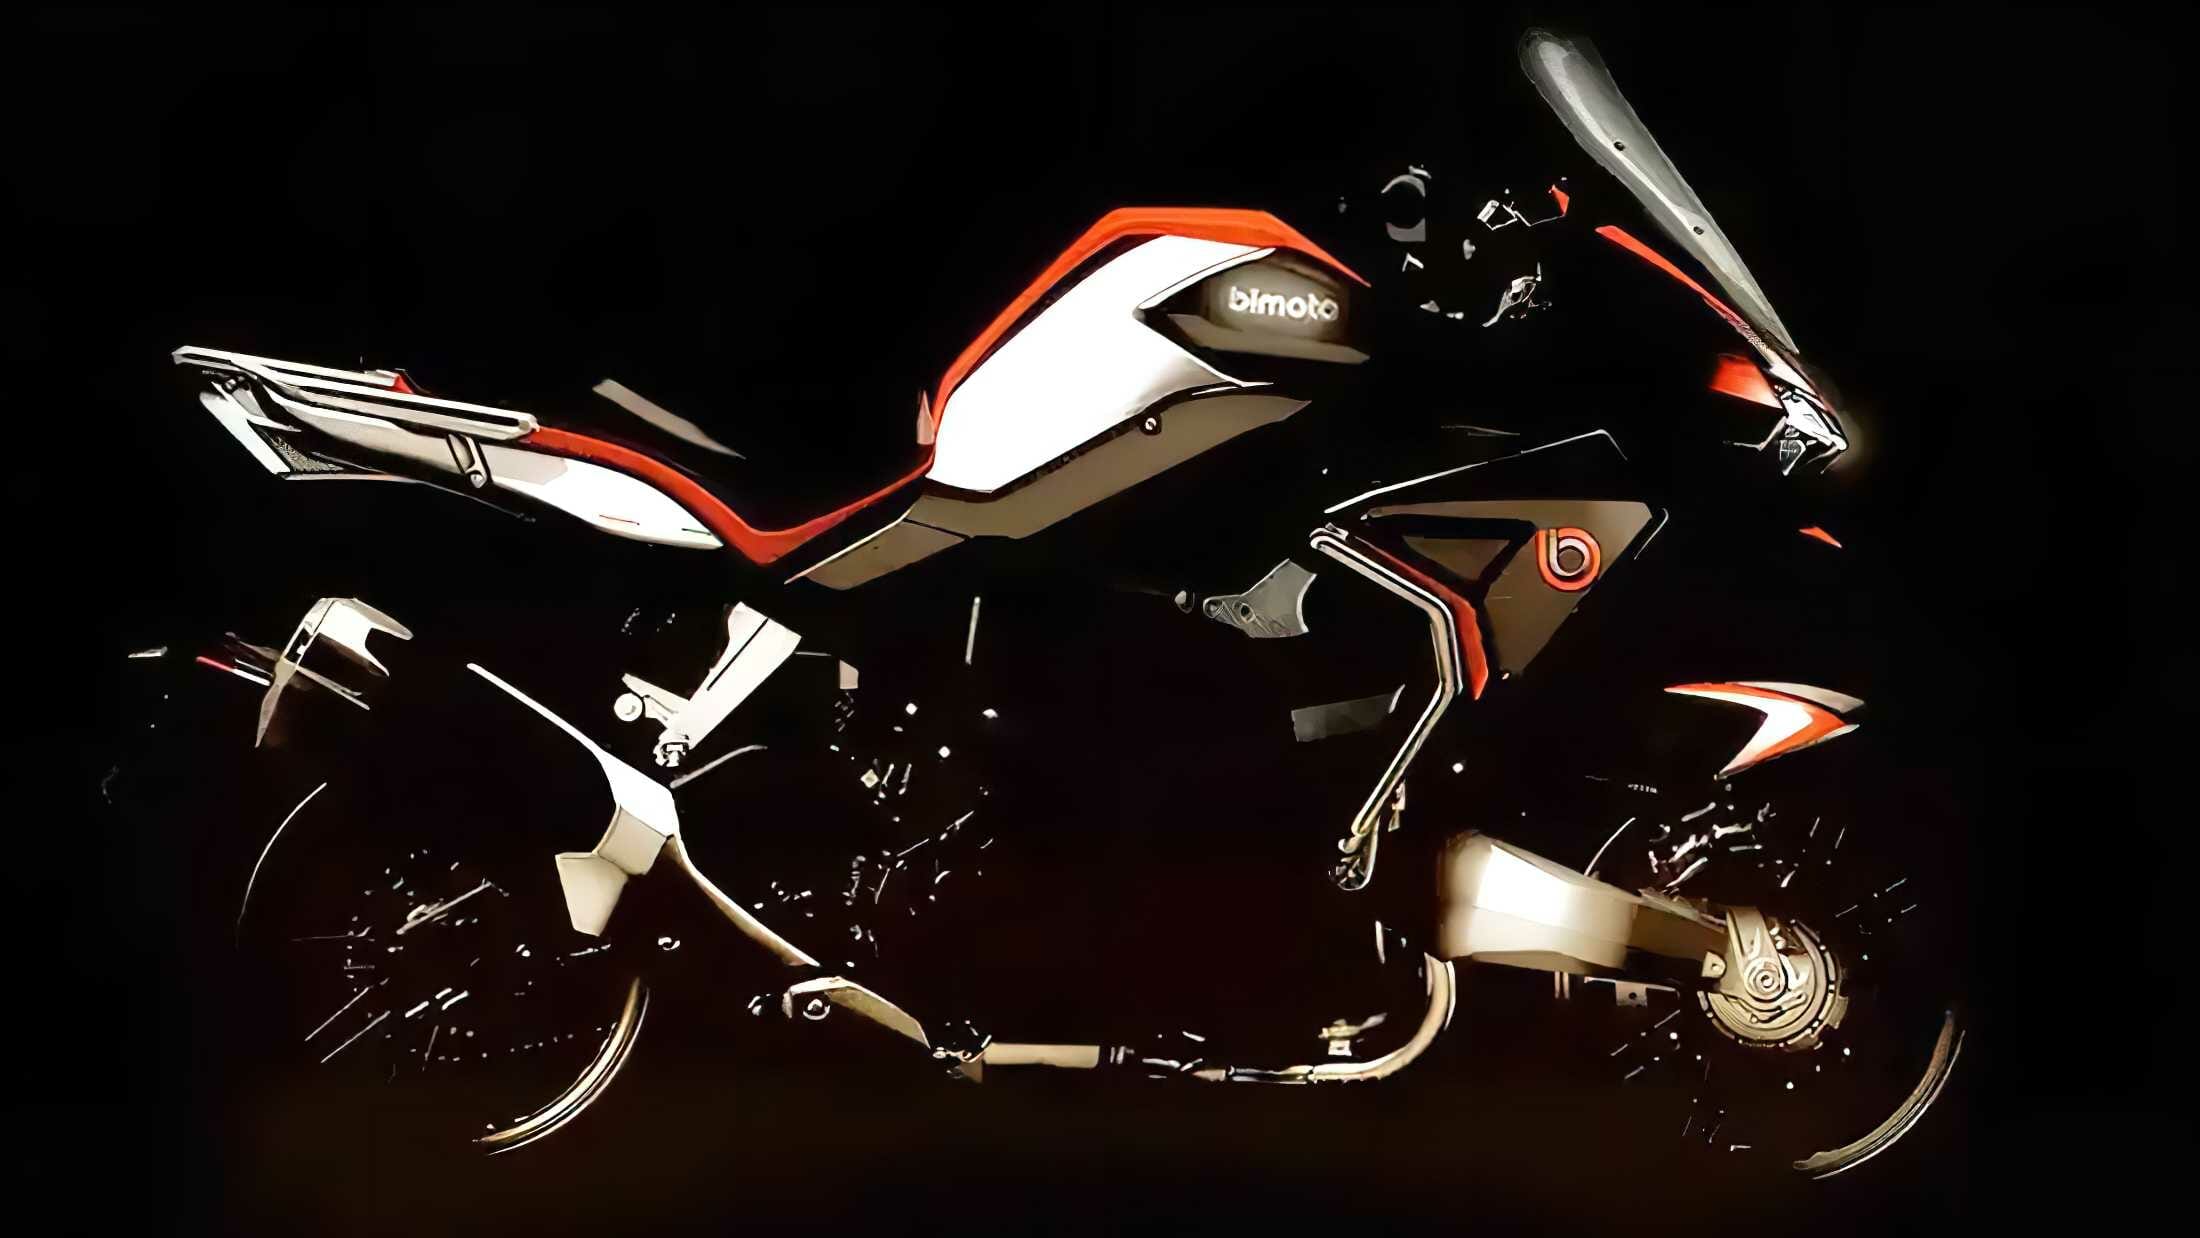 Bimota Tesi H2 crossover announced
- also in the MOTORCYCLES.NEWS APP